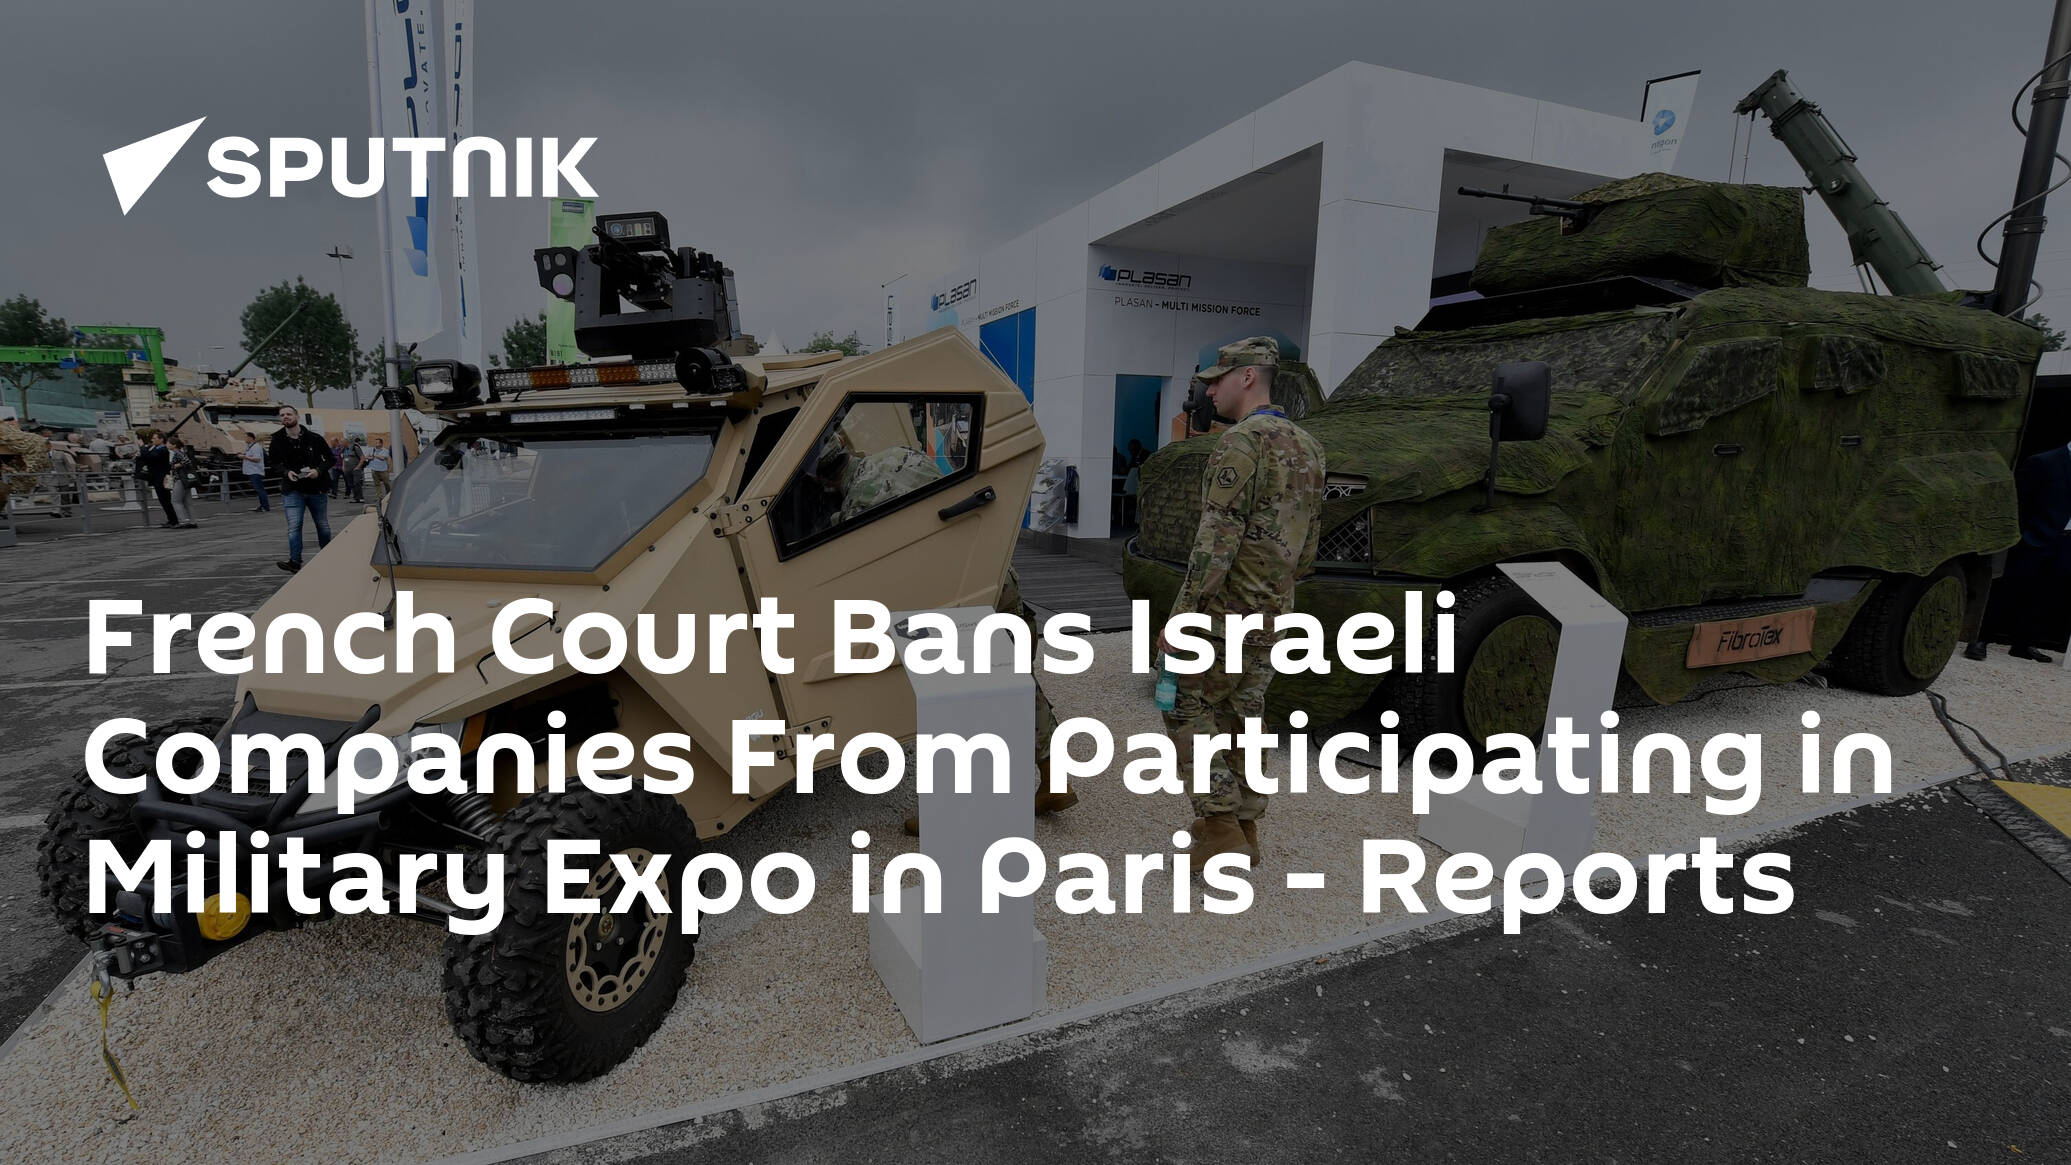 French Court Bans Israeli Companies From Participating in Military Expo in Paris – Reports